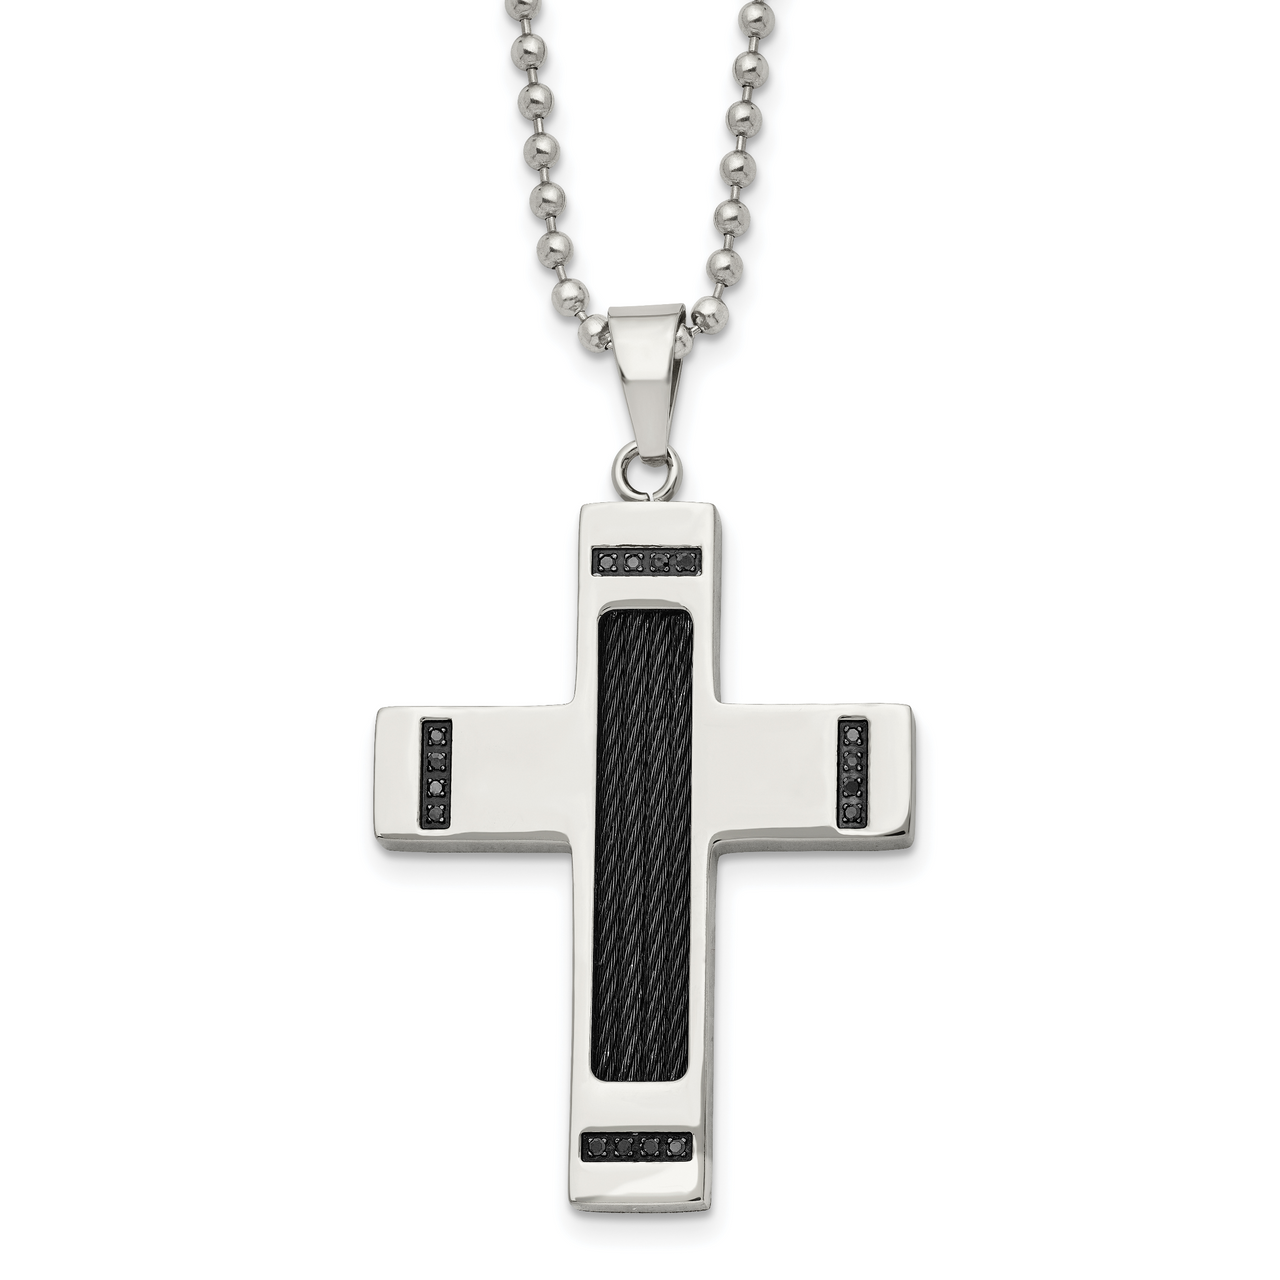 J.P. Army Men's Jewelry Stainless Steel 24 Inch Cable Cross Pendant Necklace  - JCPenney